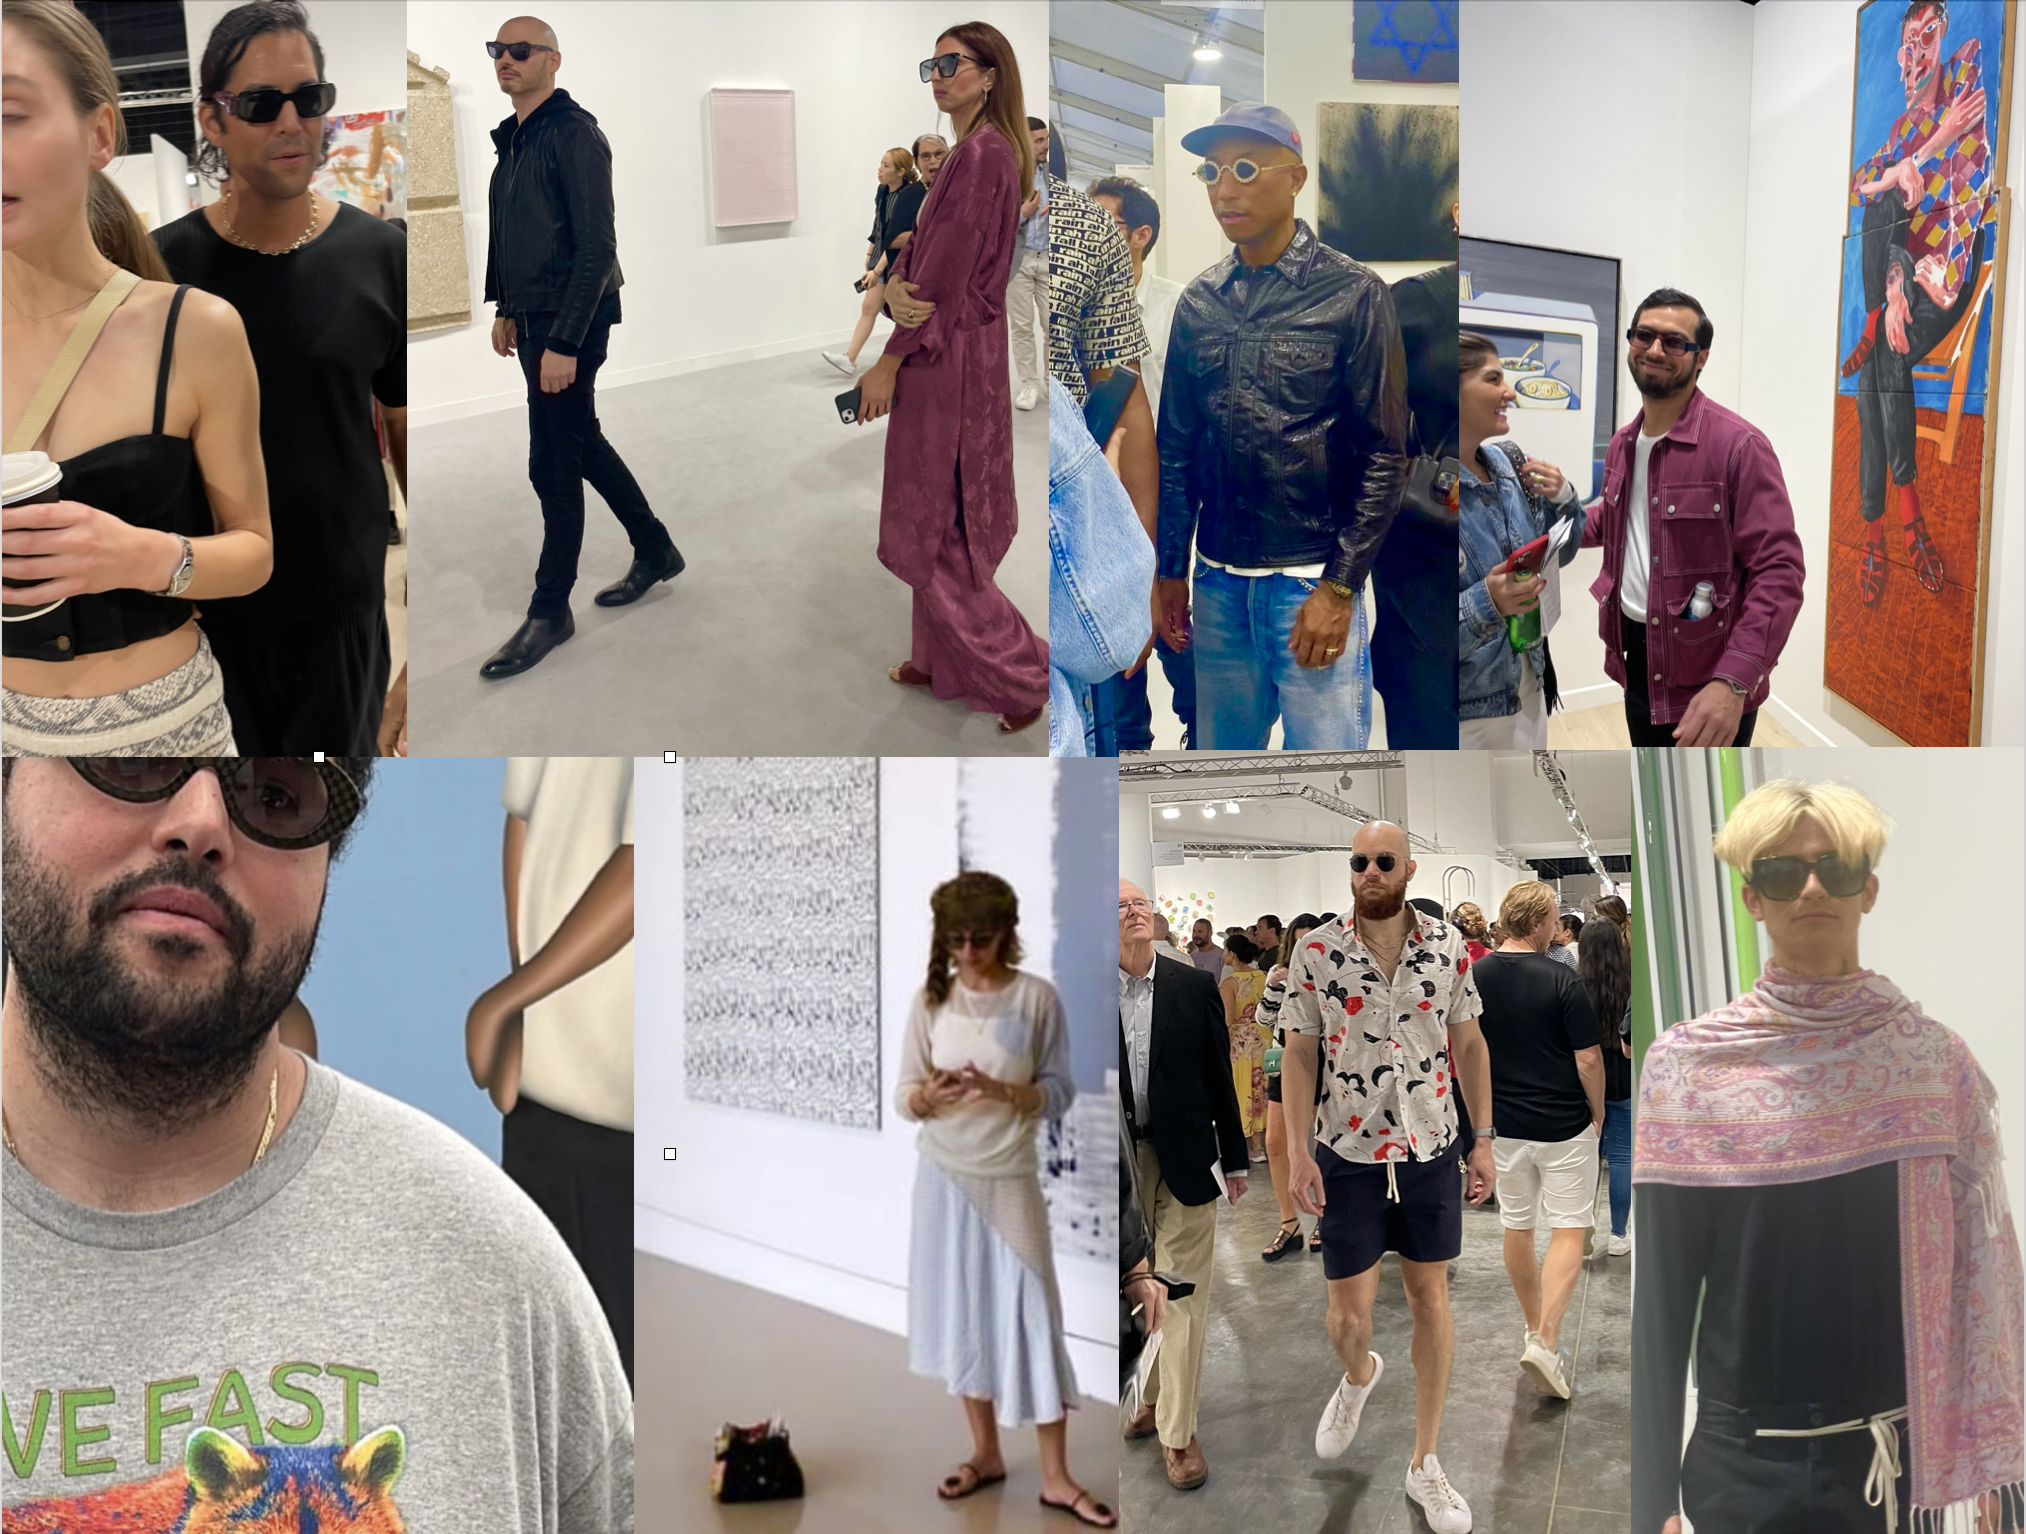 Sunglass Idiots! Slipper Thieves! Lawsuits! Kenny Schachter Braved the Existential Vortex of Art Basel Miami Beach to Get the Goods photo